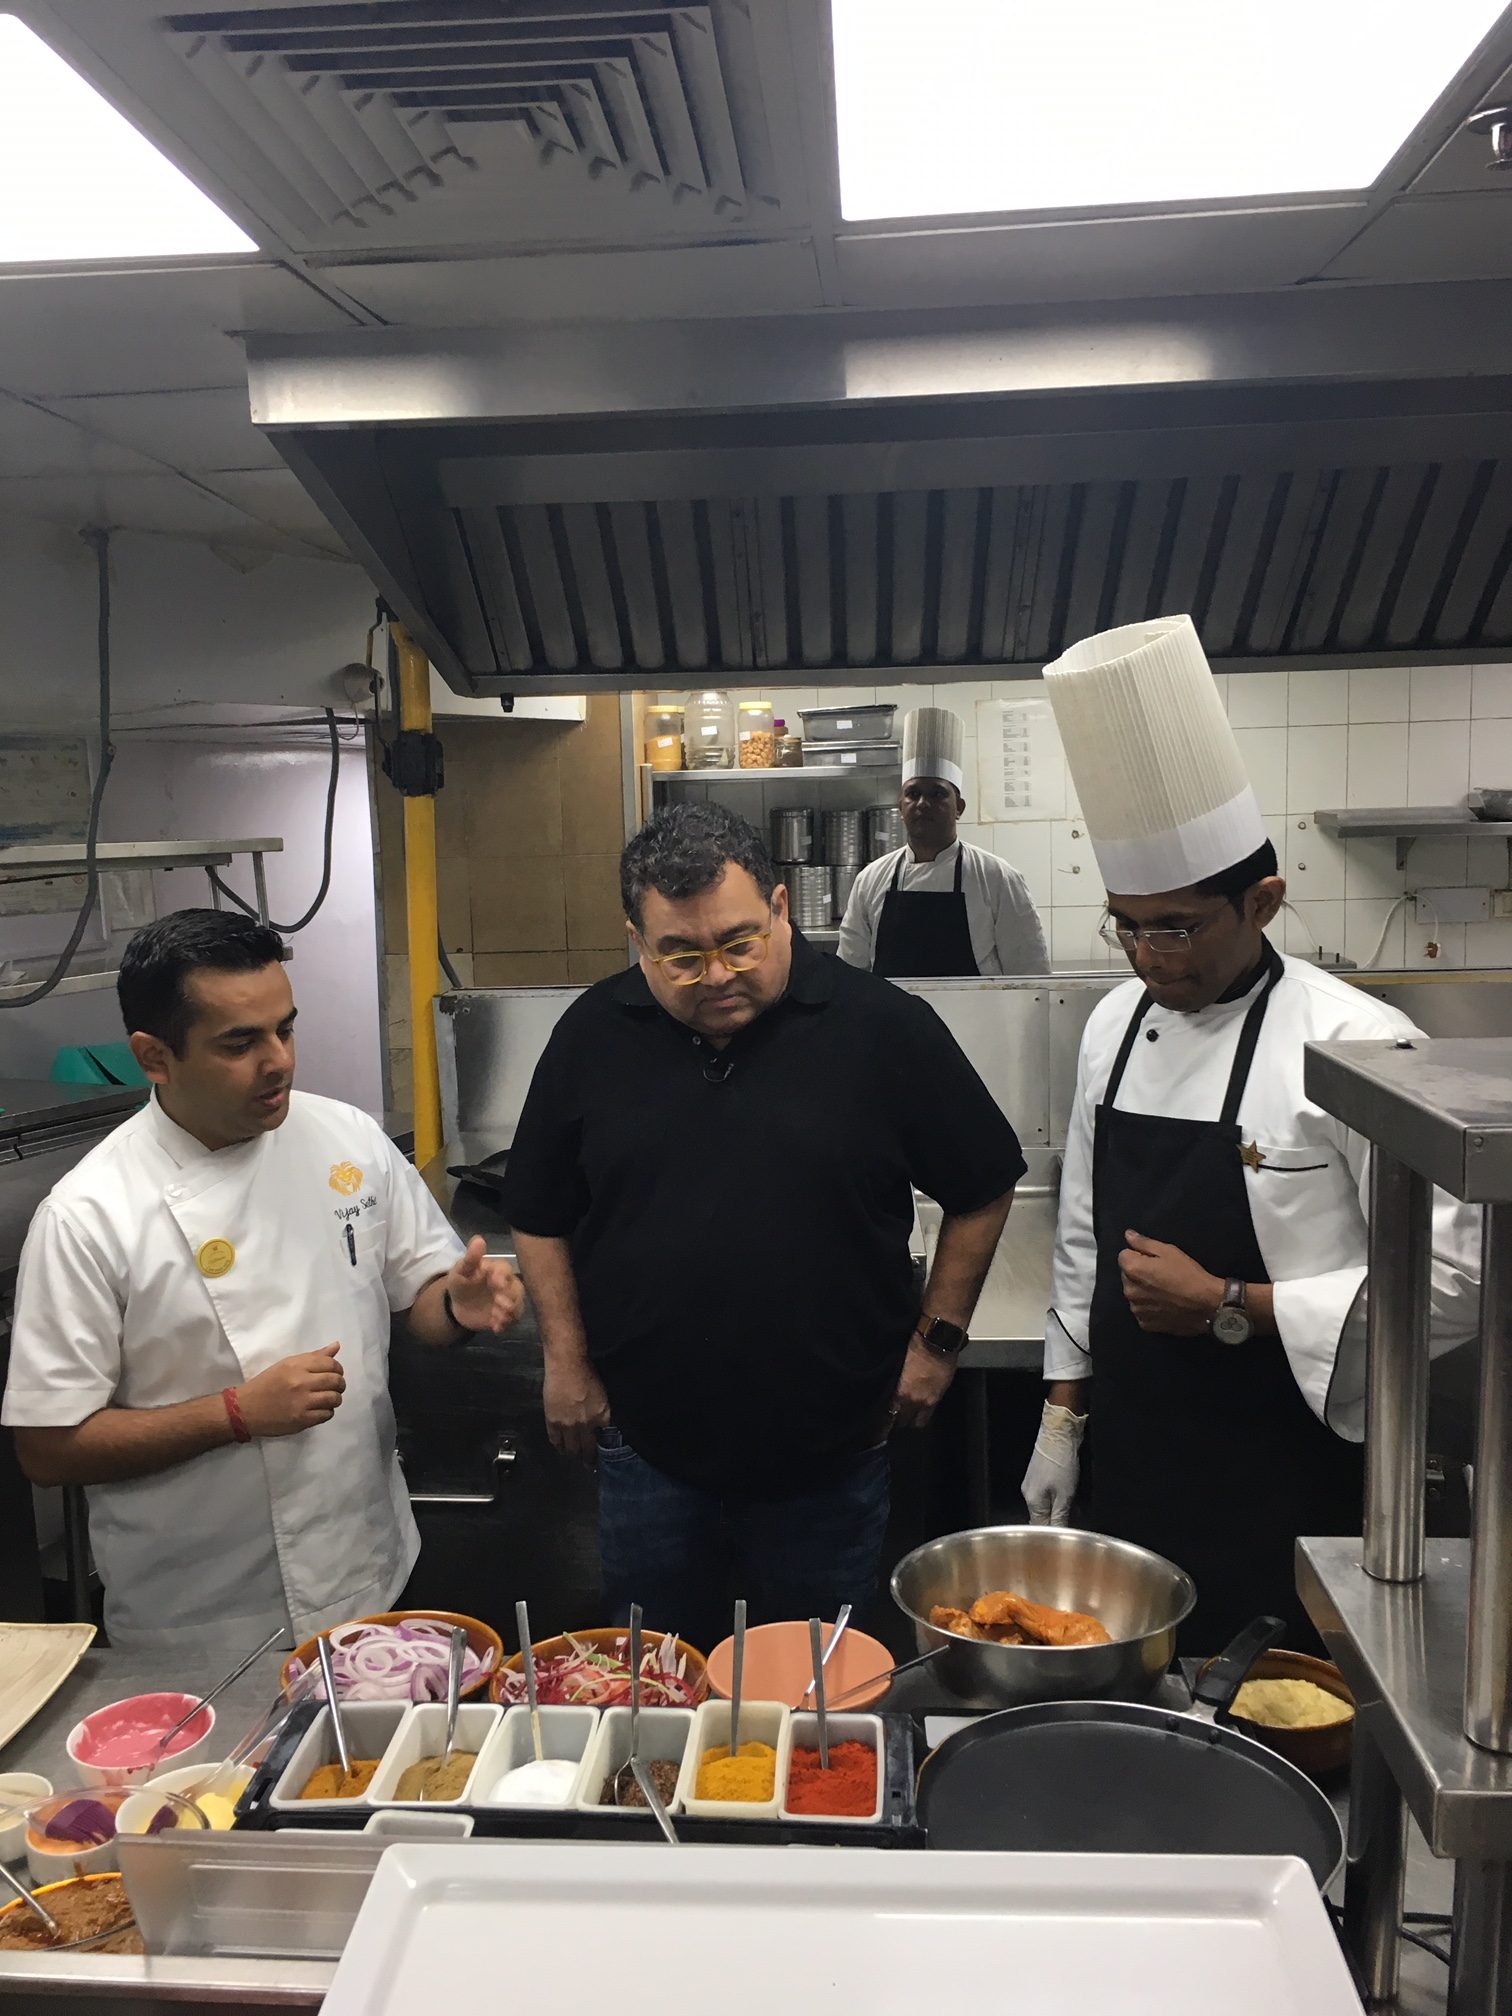 Cookout Session with Celebrity Food Critic Kunal Vijaykar at Pacific Mall Delhi . Check out some of the best Restaurants that pacific Mall Delhi has. #delhifood #cookout #KunalVijayakar #Chef #CafeDelhiheights #Chillis #foodlovers #cafeindelhi